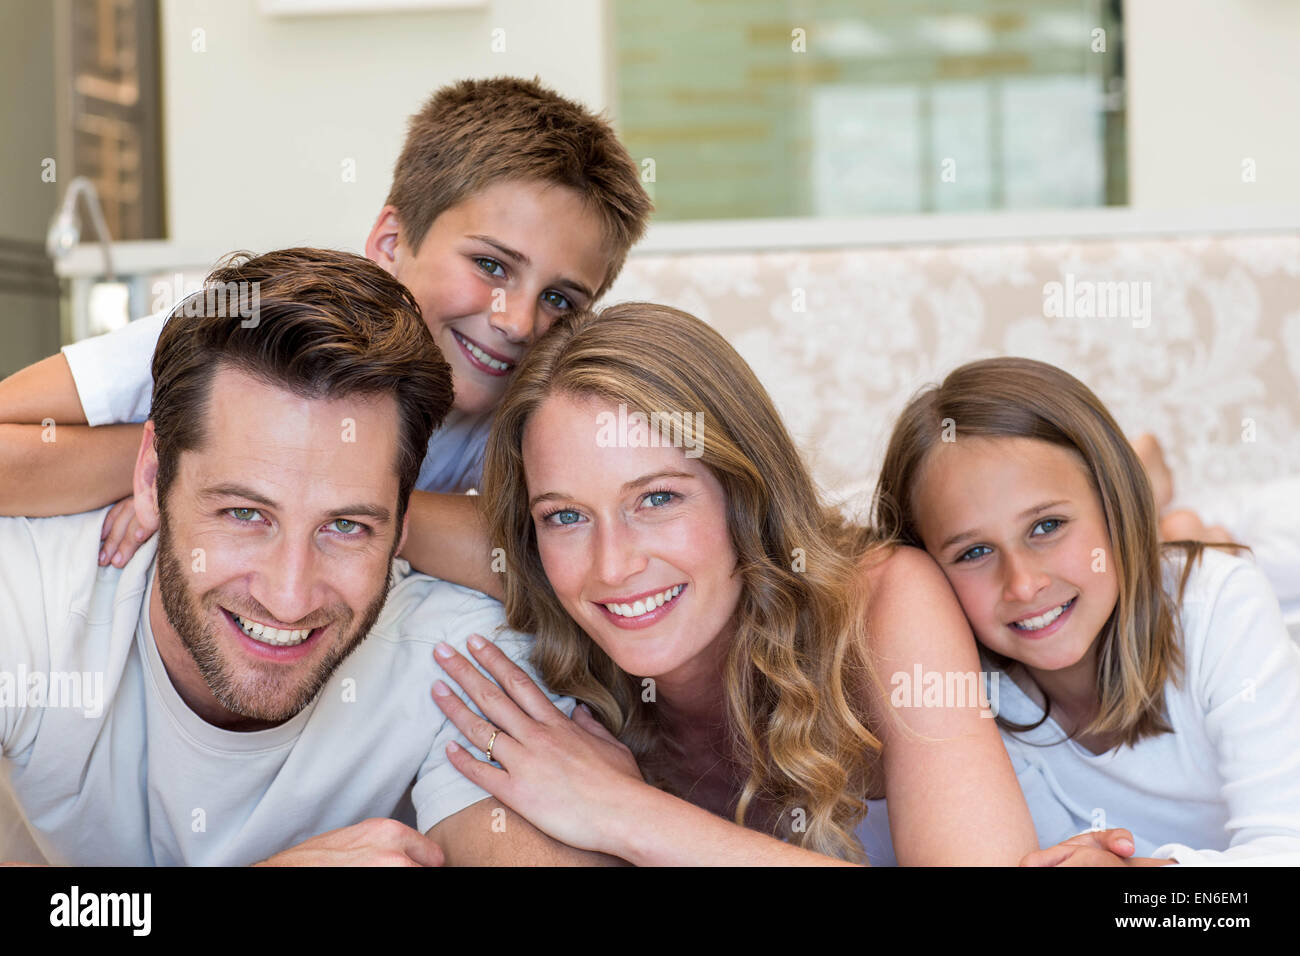 Happy Family smiling at camera Banque D'Images